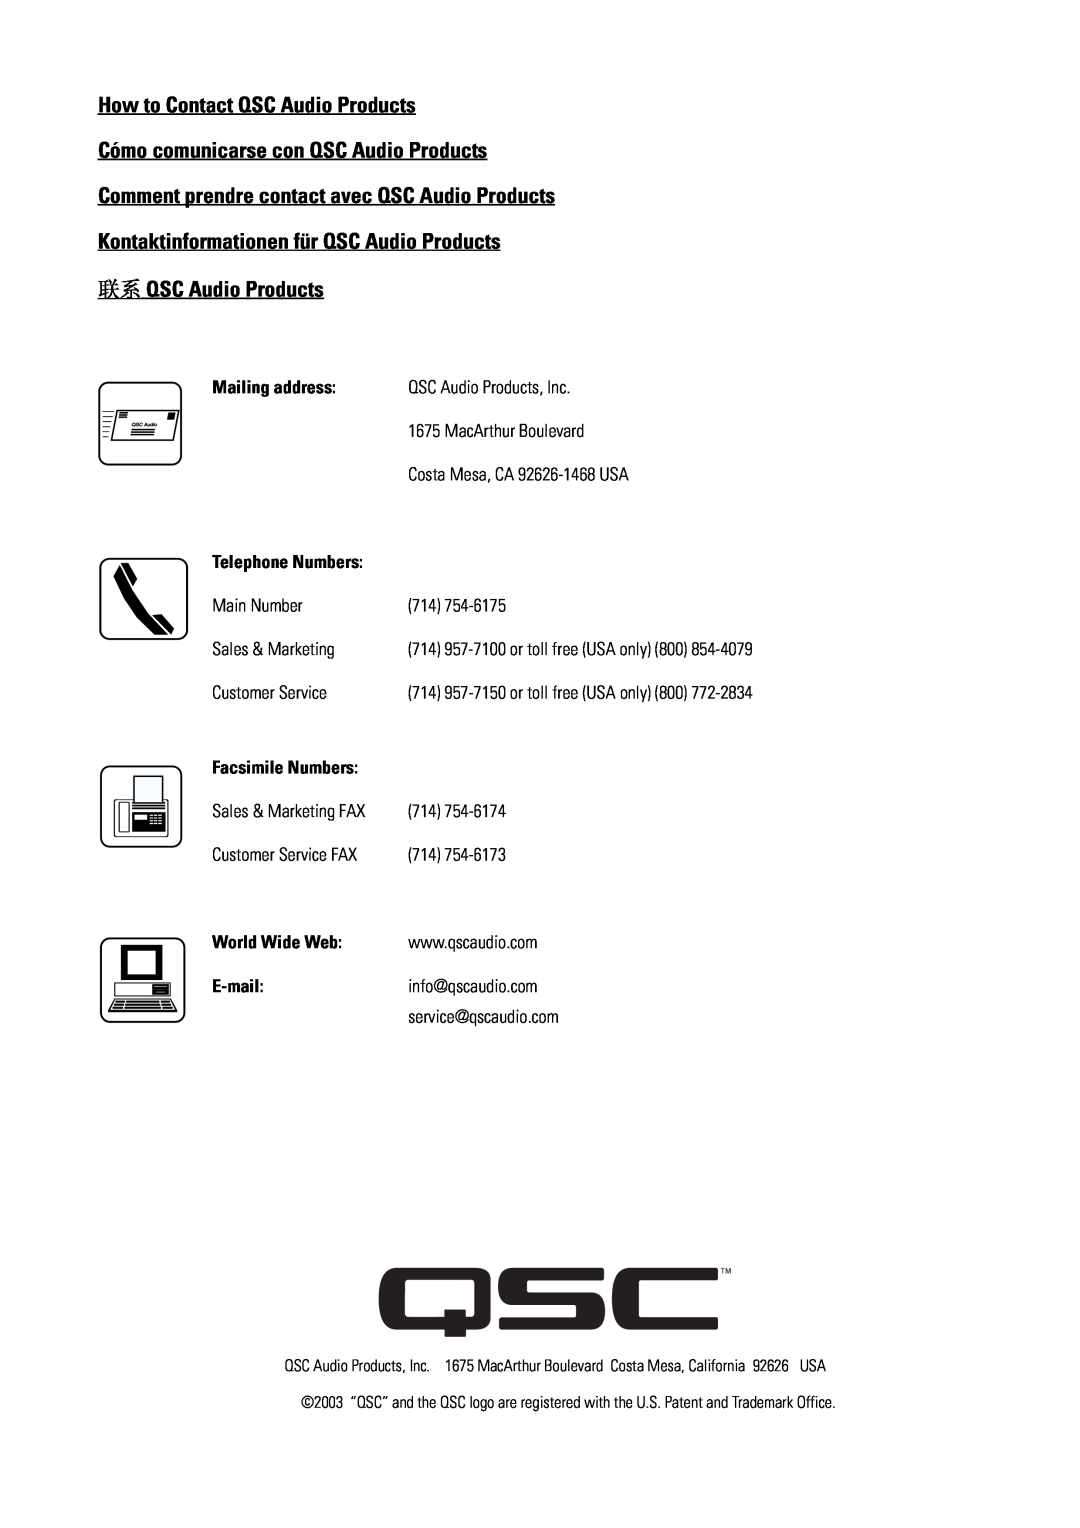 QSC Audio ADS52 How to Contact QSC Audio Products, Cómo comunicarse con QSC Audio Products, 联系 QSC Audio Products 